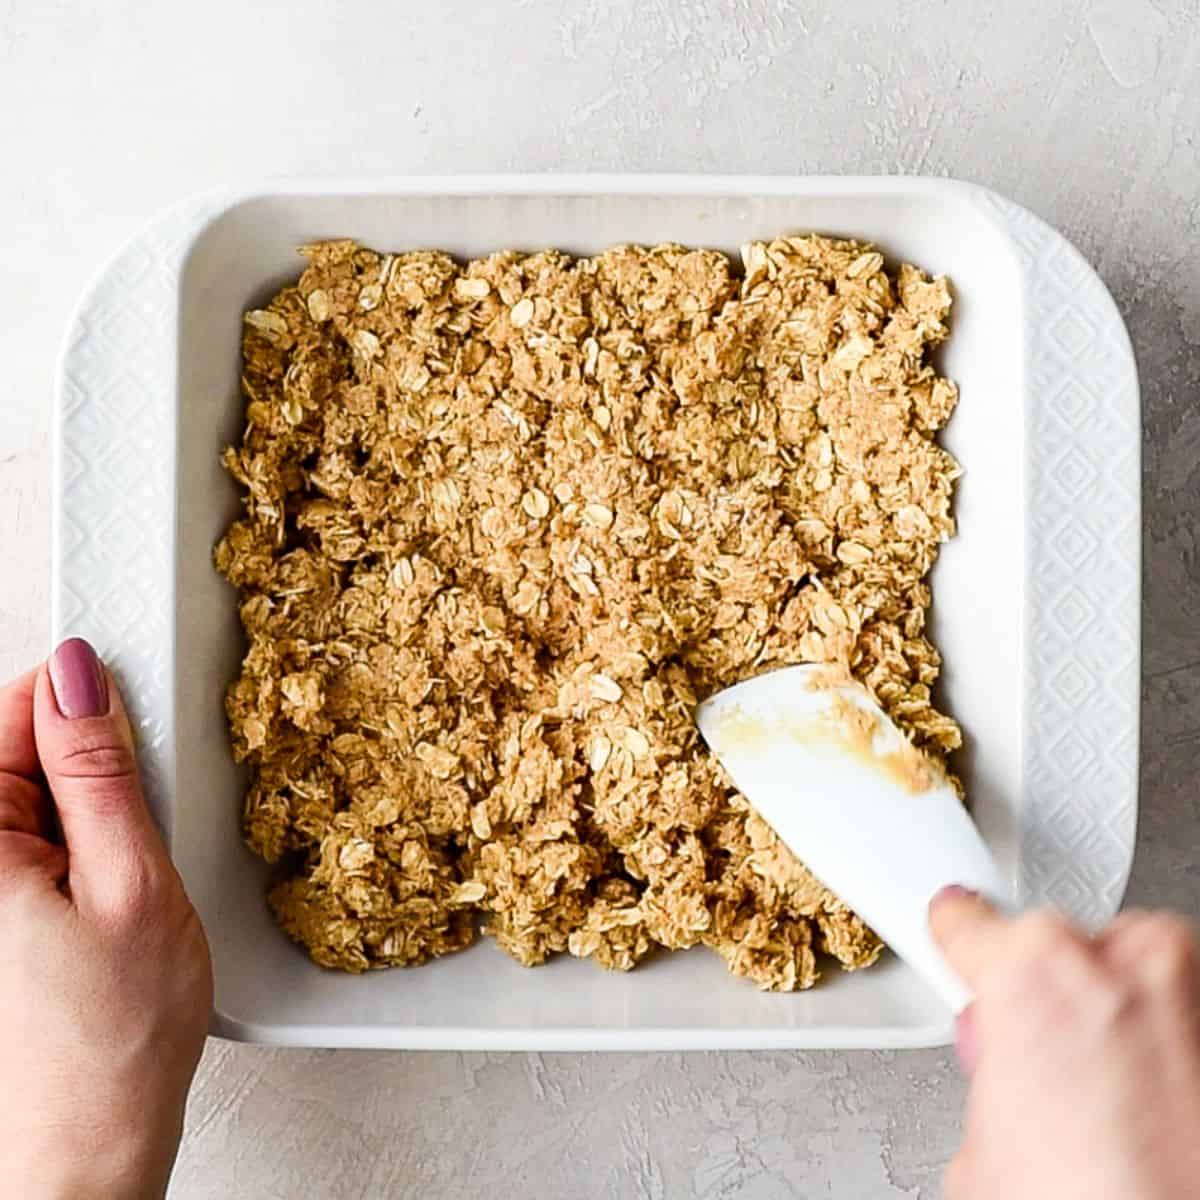 No Bake Oatmeal Bars being pressed into a baking dish